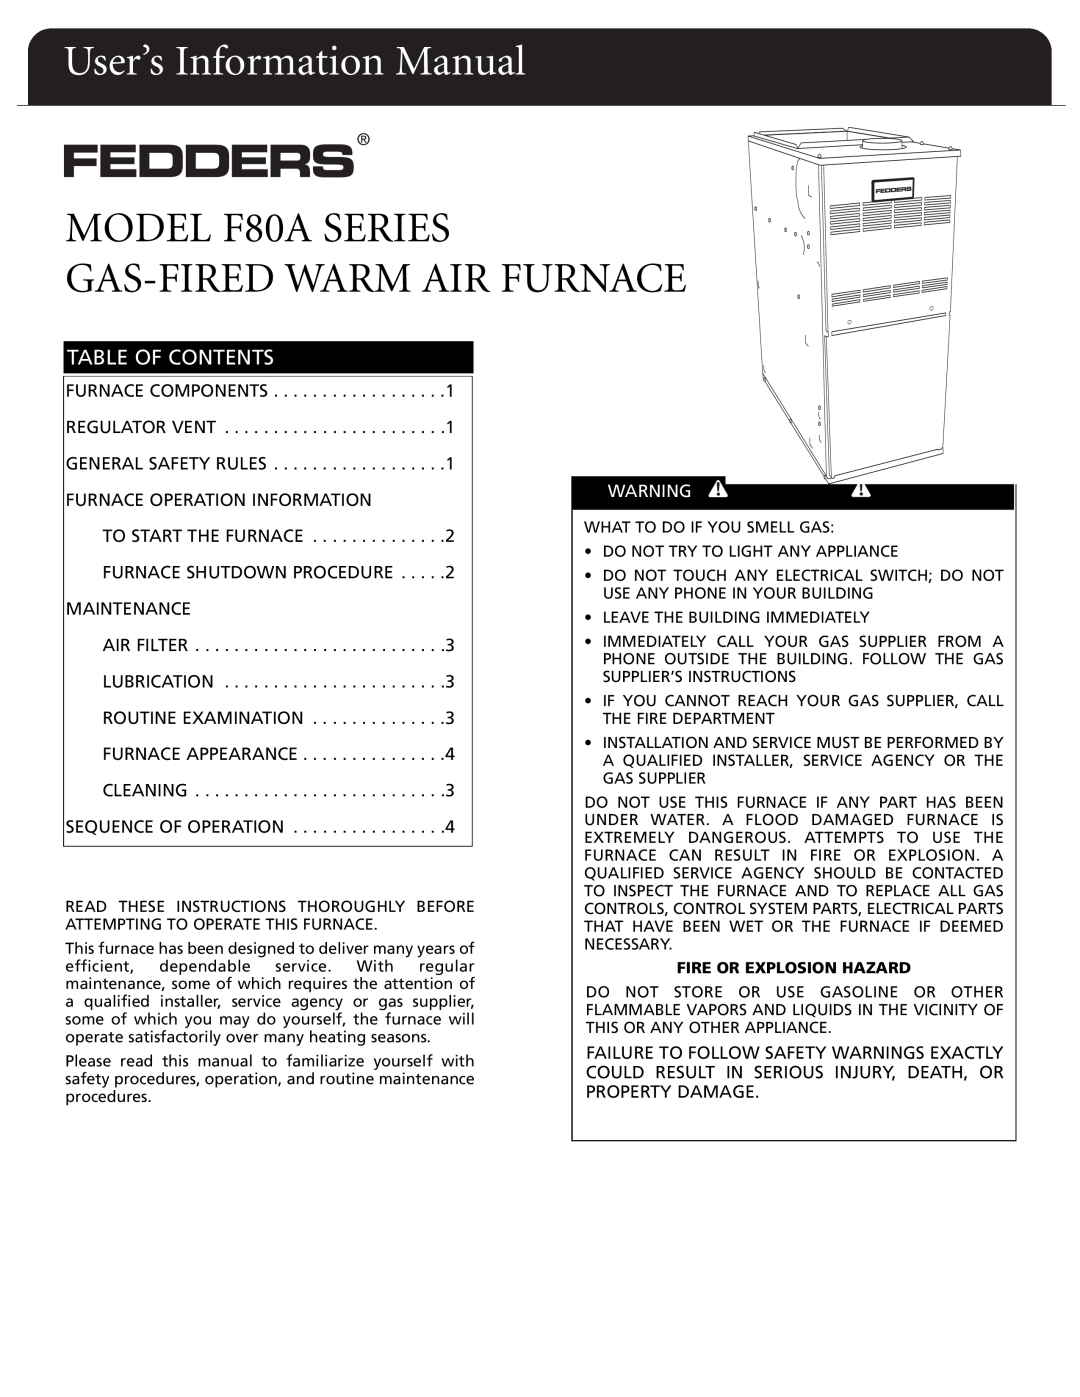 Fedders dimensions User’s Information Manual, MODEL F80A SERIES GAS-FIREDWARM AIR FURNACE, Table Of Contents 